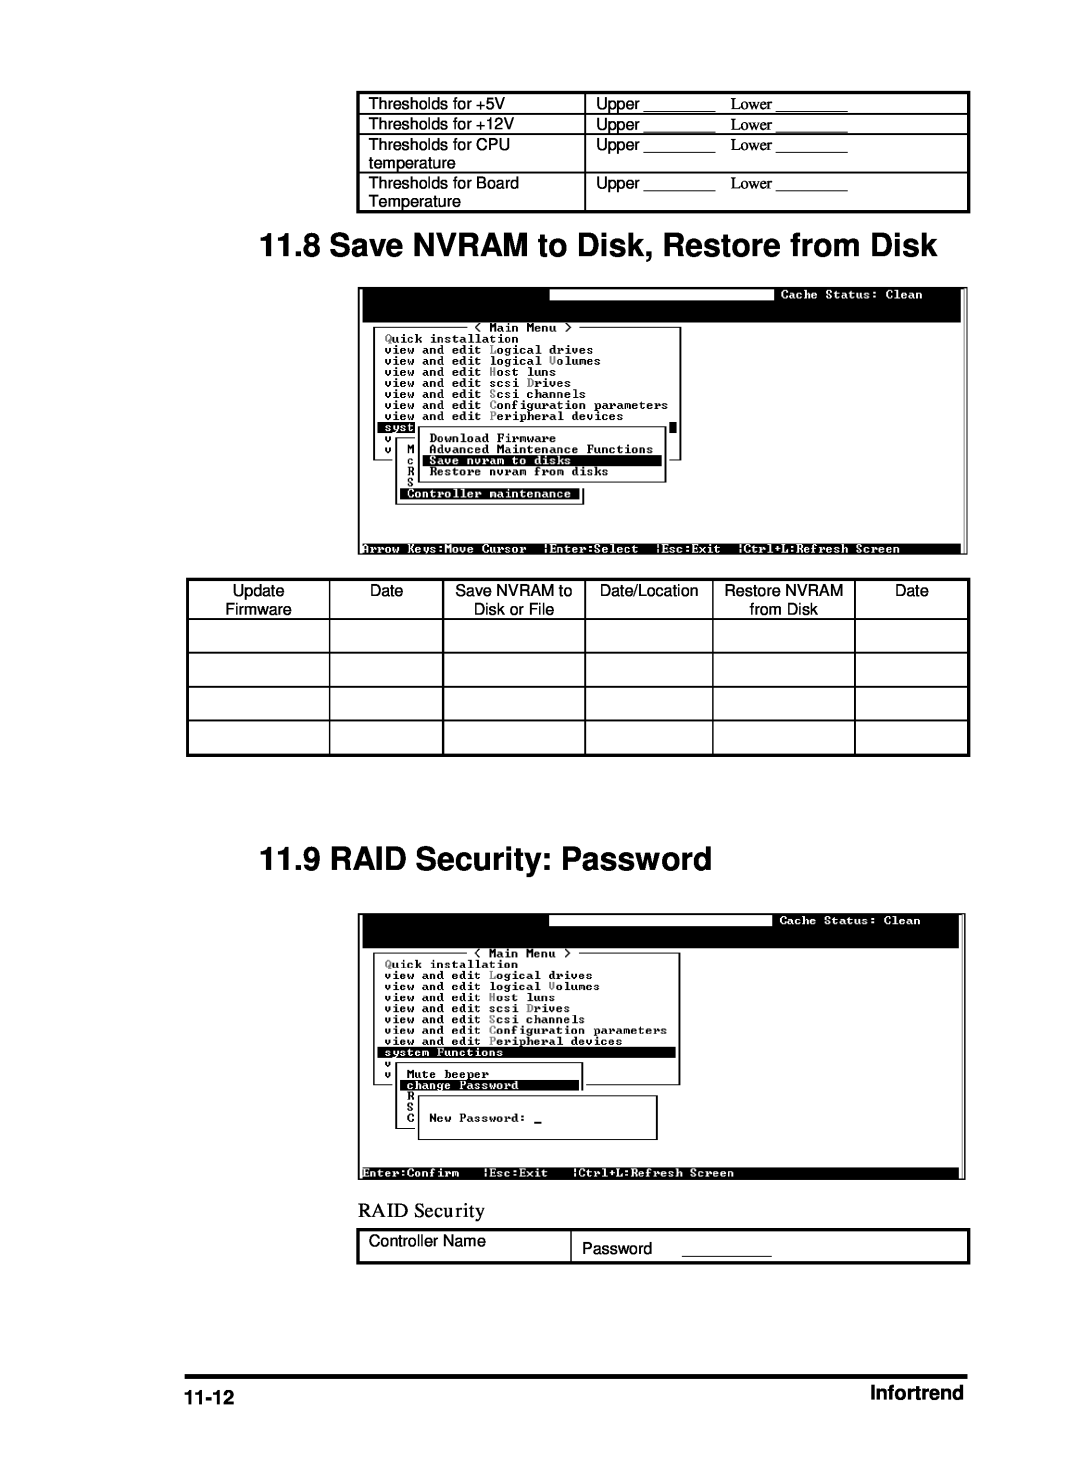 Compaq Infortrend manual Save NVRAM to Disk, Restore from Disk, RAID Security Password 